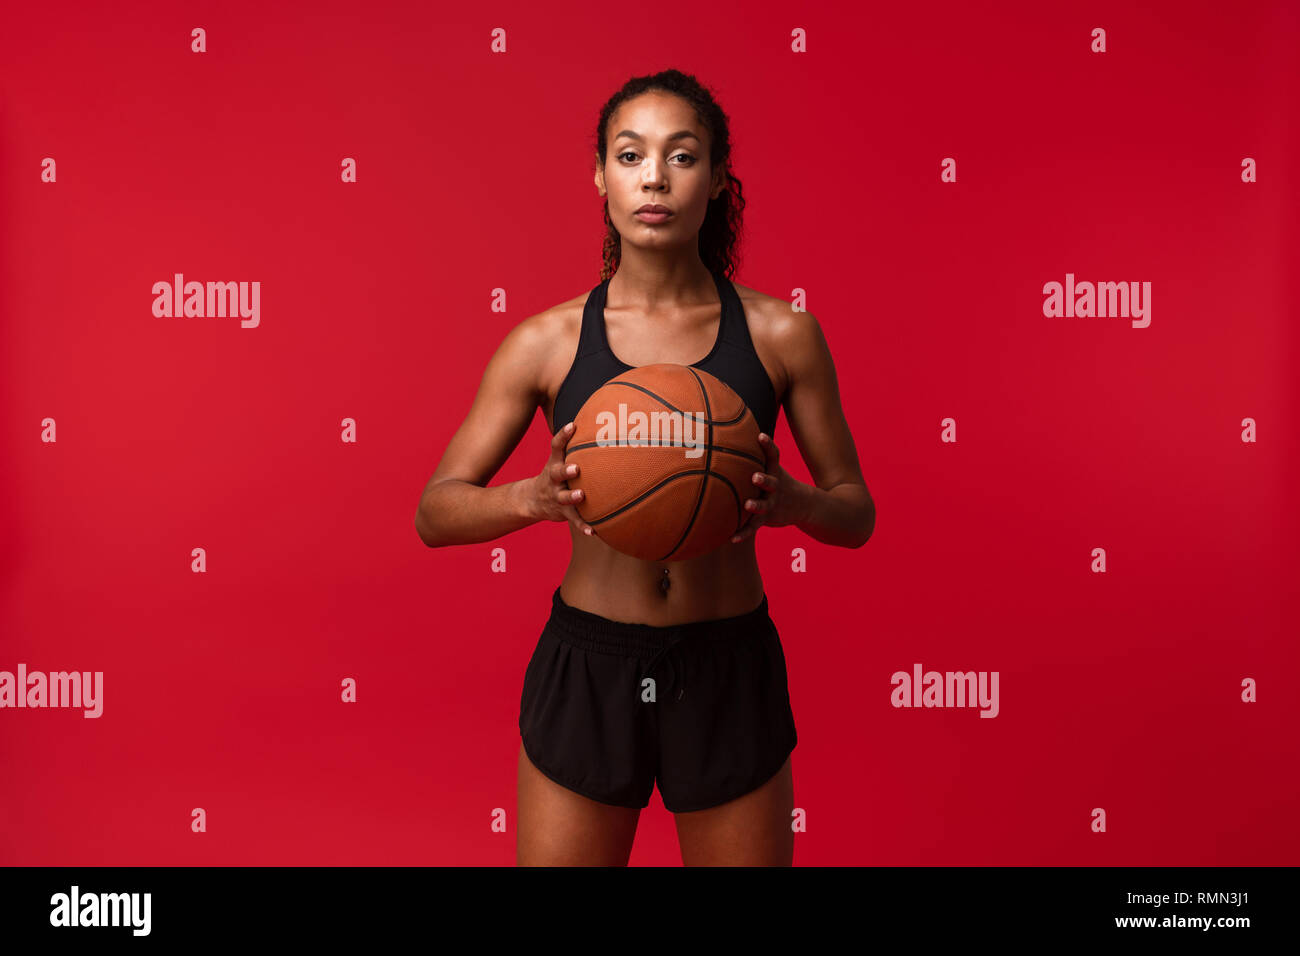 Image of a strong young african sports fitness woman basketball player posing isolated over red wall background holding ball. Stock Photo